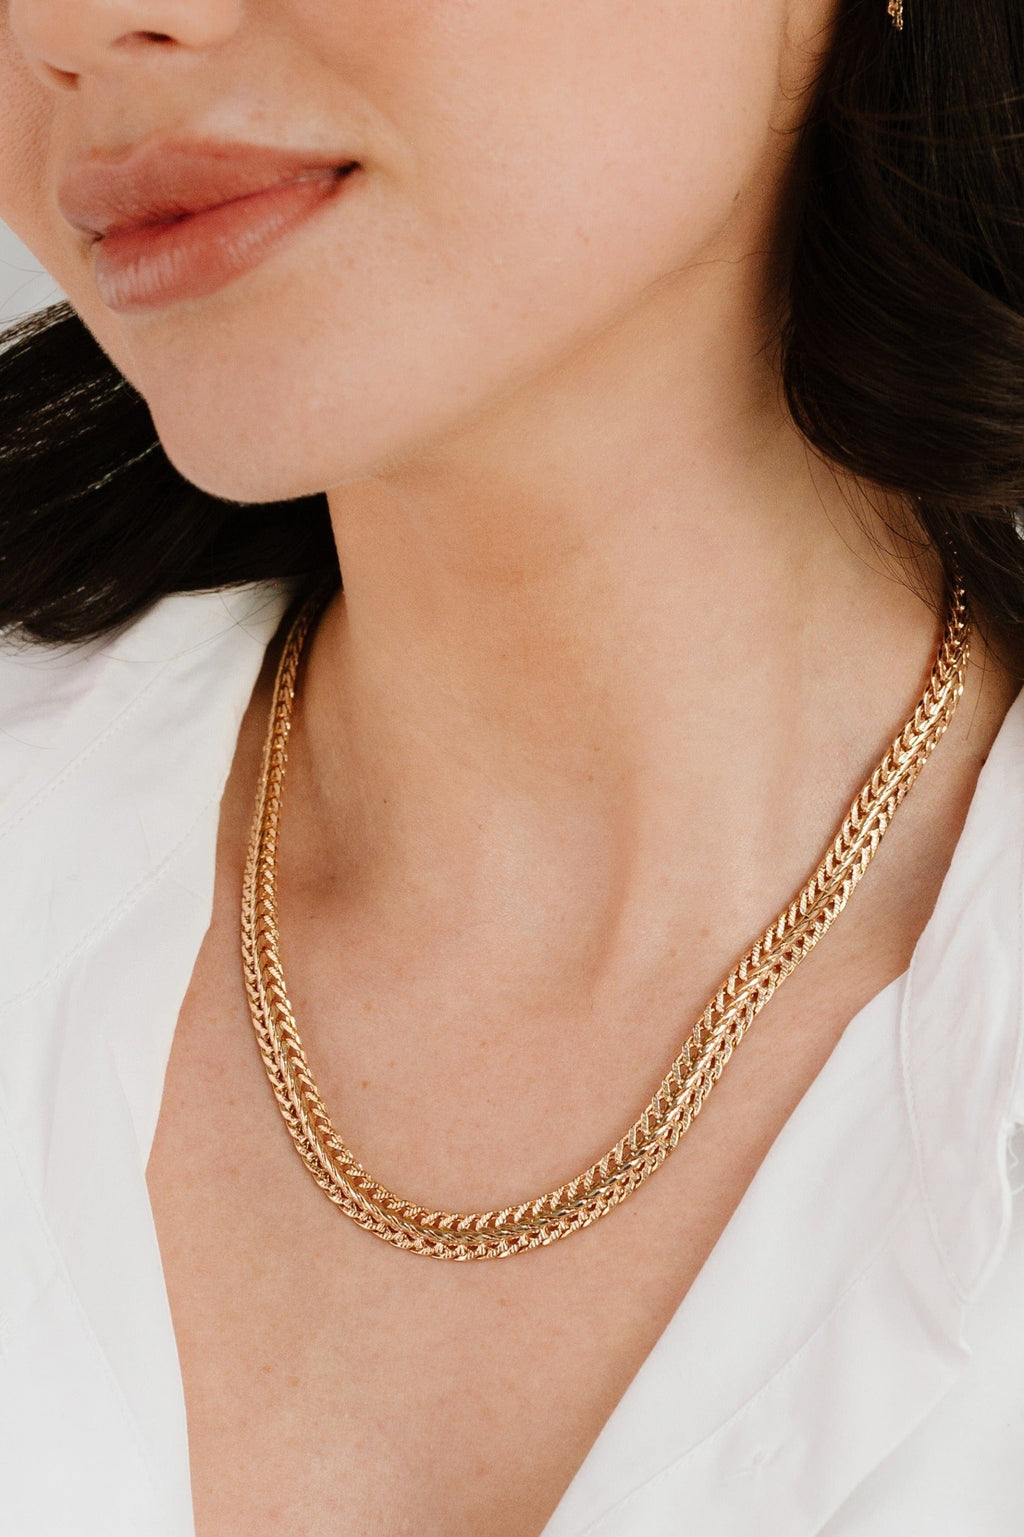 Ettika Necklaces 18k Gold Plated / One Size Woven 18k Gold Plated Chain Necklace